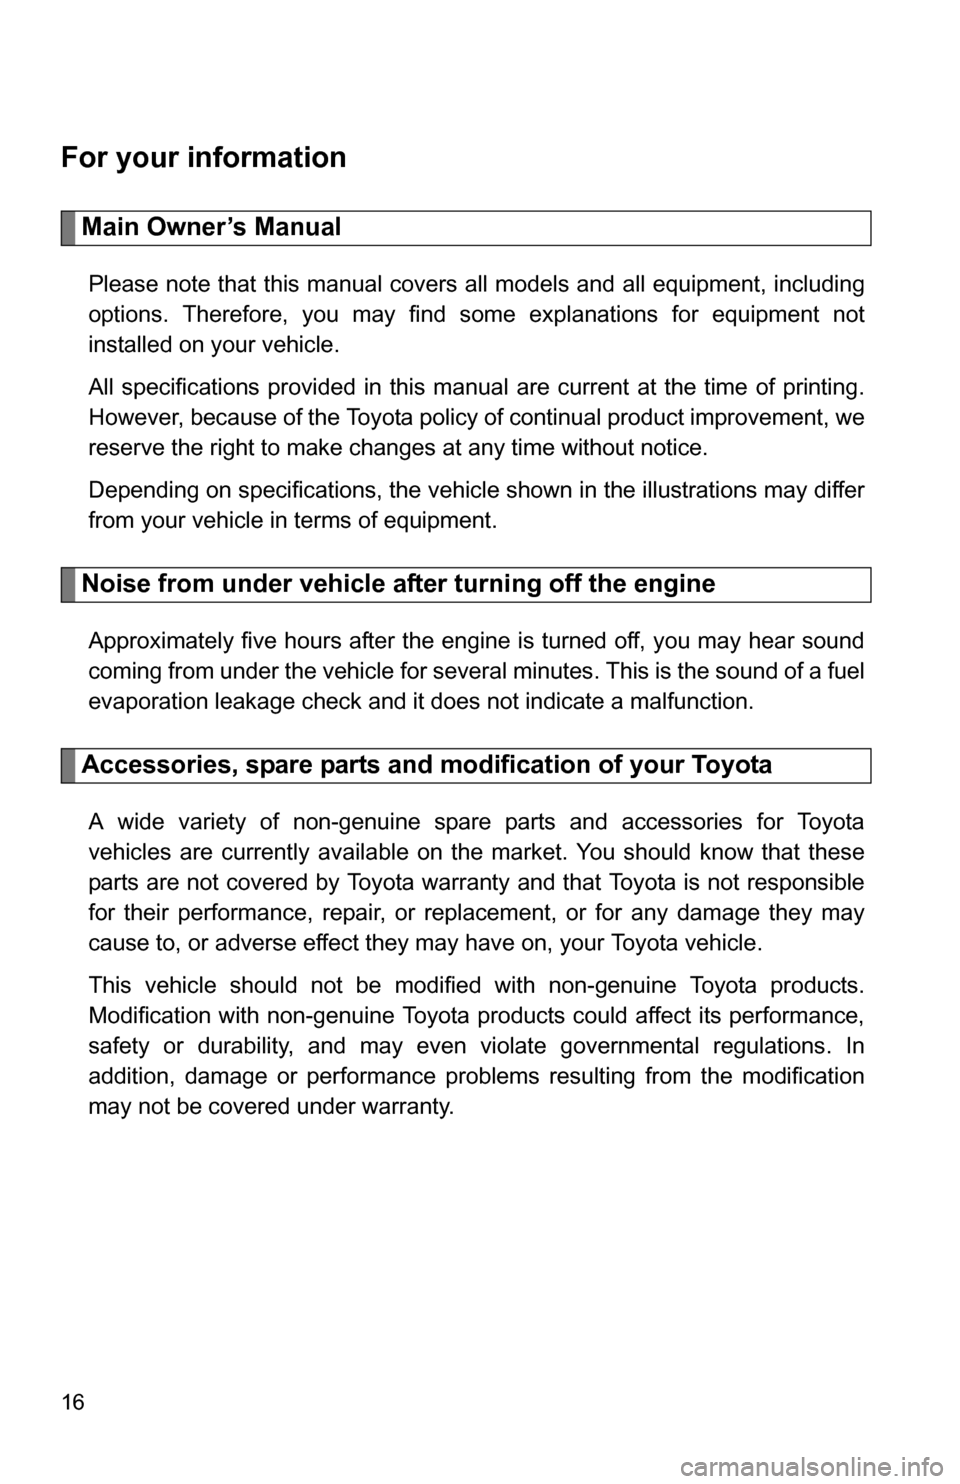 TOYOTA CAMRY HYBRID 2010 XV40 / 8.G Owners Manual 16
For your information
Main Owner’s Manual
Please note that this manual covers all models and all equipment, including
options. Therefore, you may find some explanations for equipment not
installed